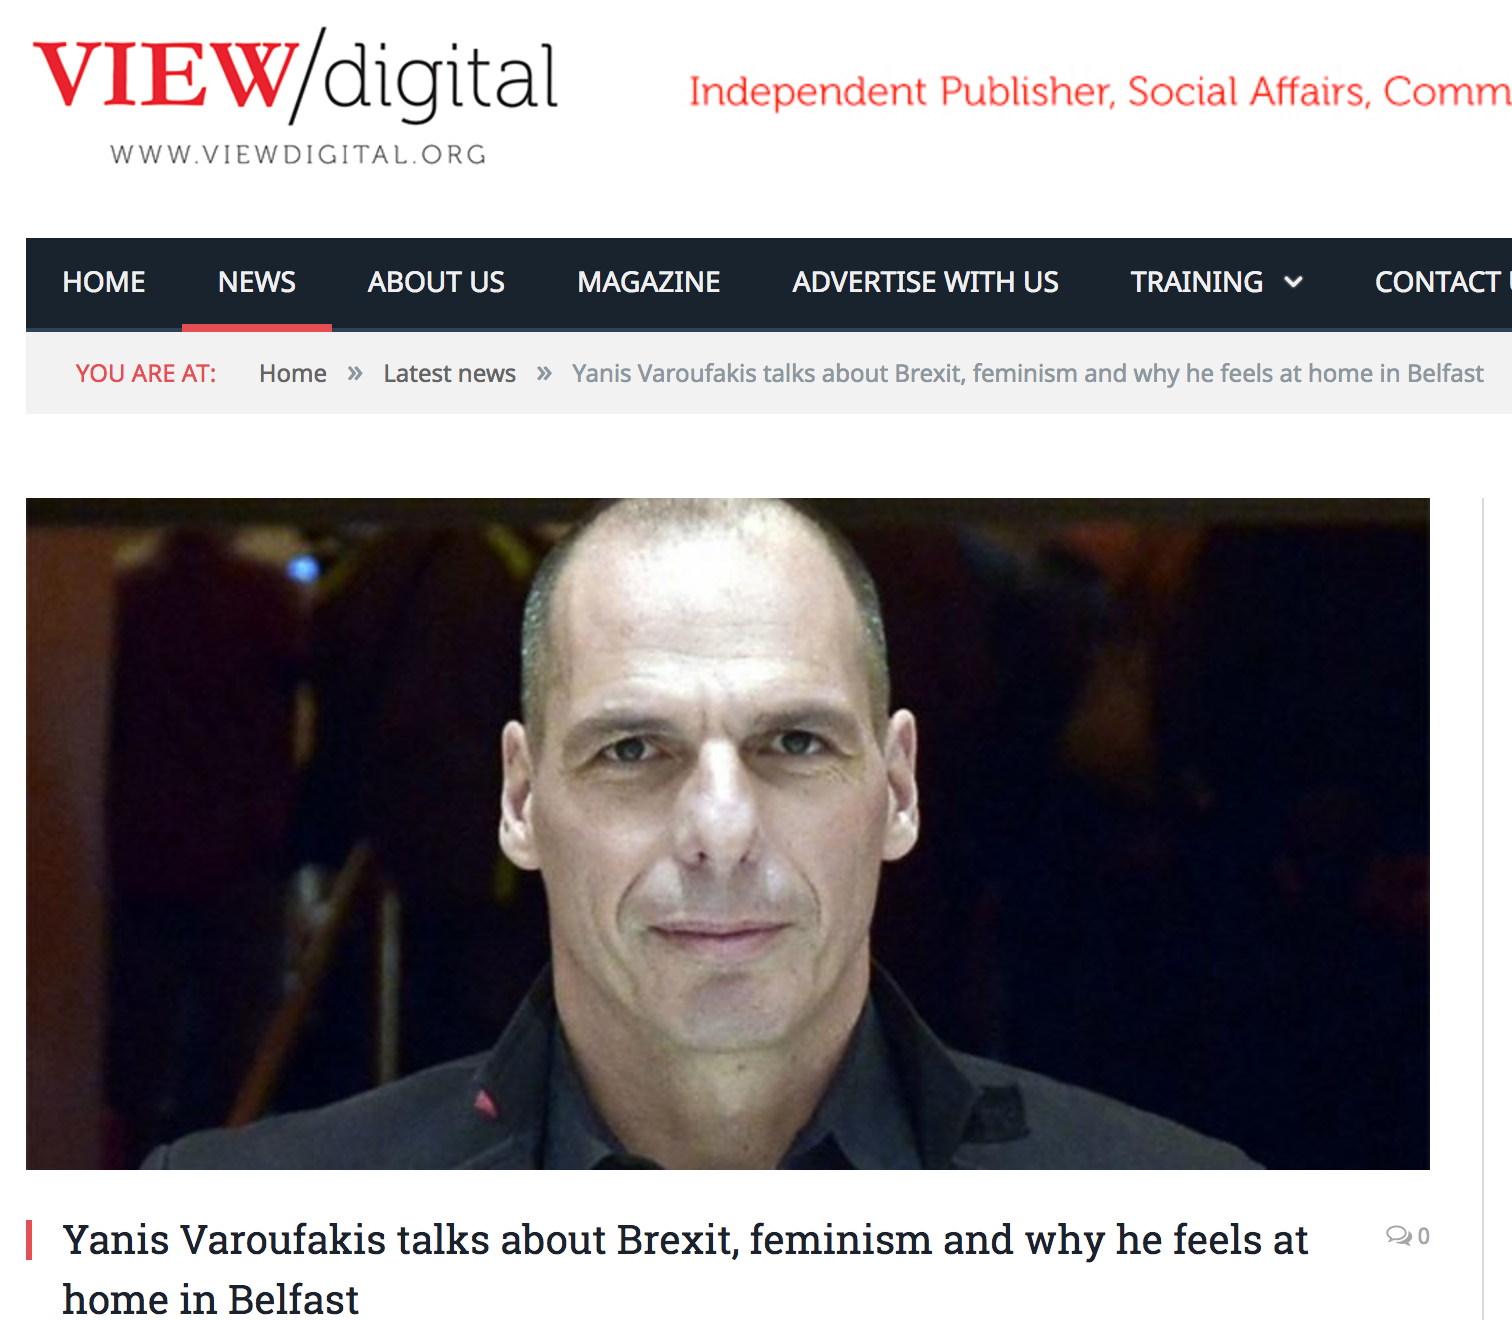 Yanis Varoufakis talks about Brexit, feminism and why he feels at home in Belfast – Viewdigital